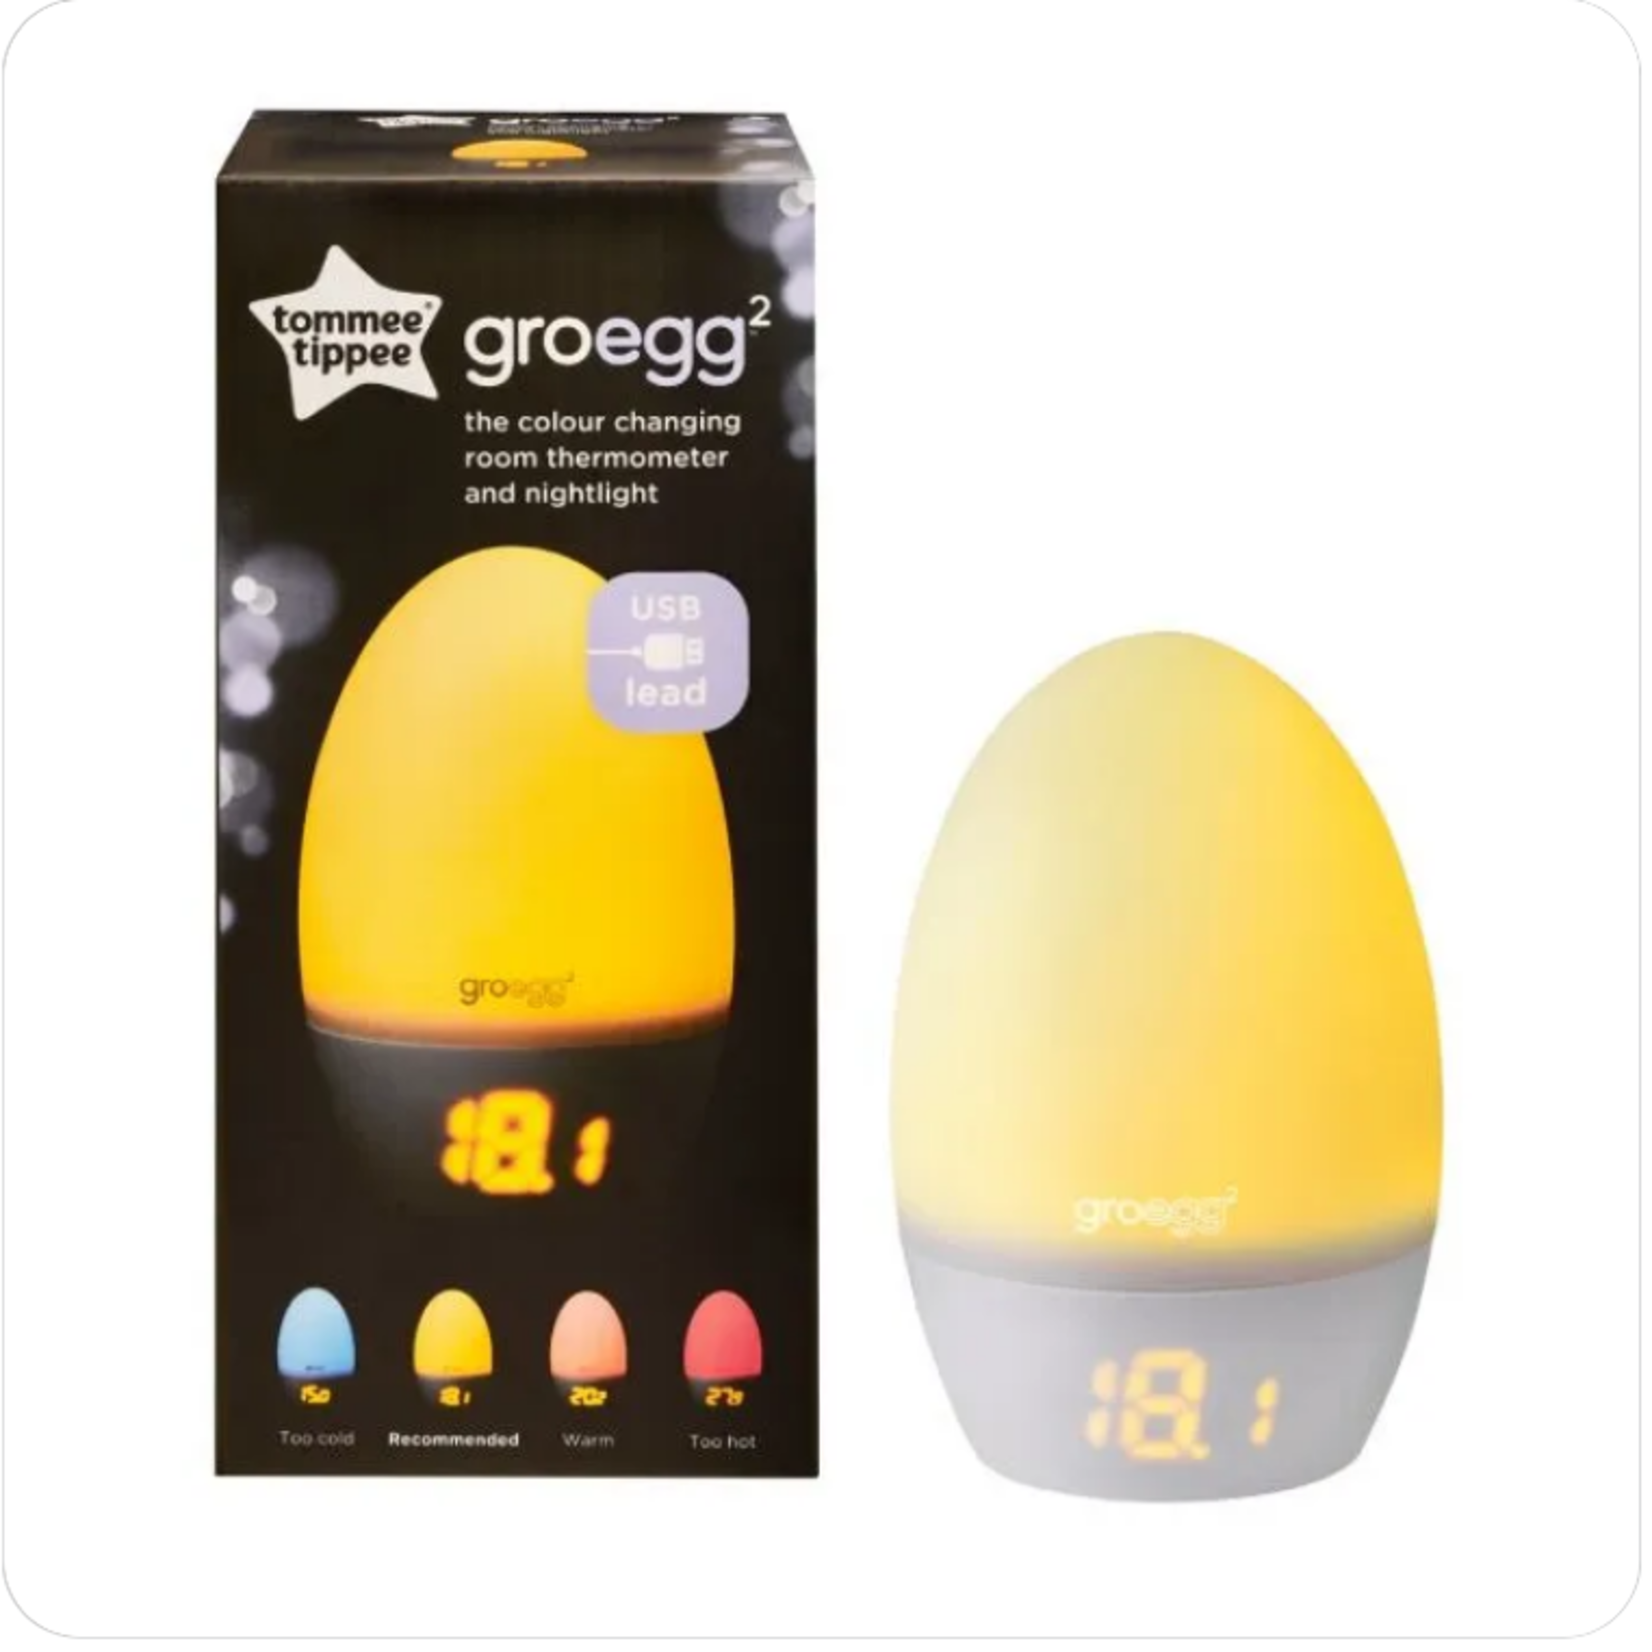 Tommee Tippee GROEGG 2 USB Ambient Room Thermometer